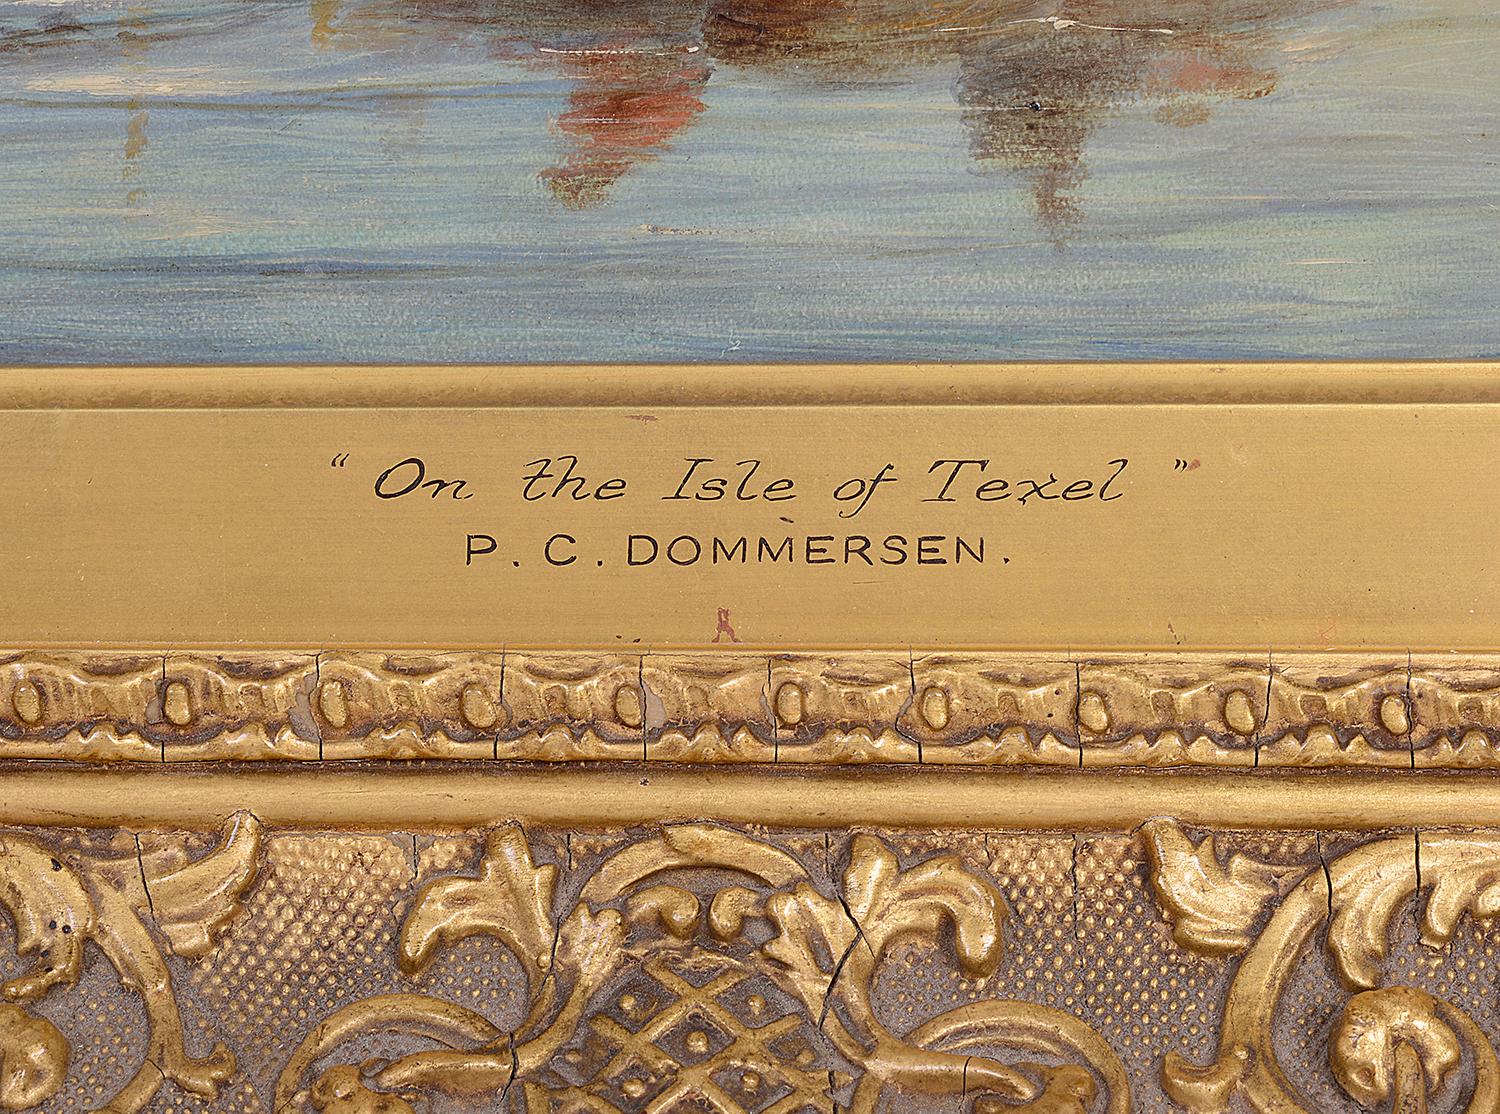 Dutch Pair of Oil on Canvas Seascapes by D.C. Dommerson, 19th Century